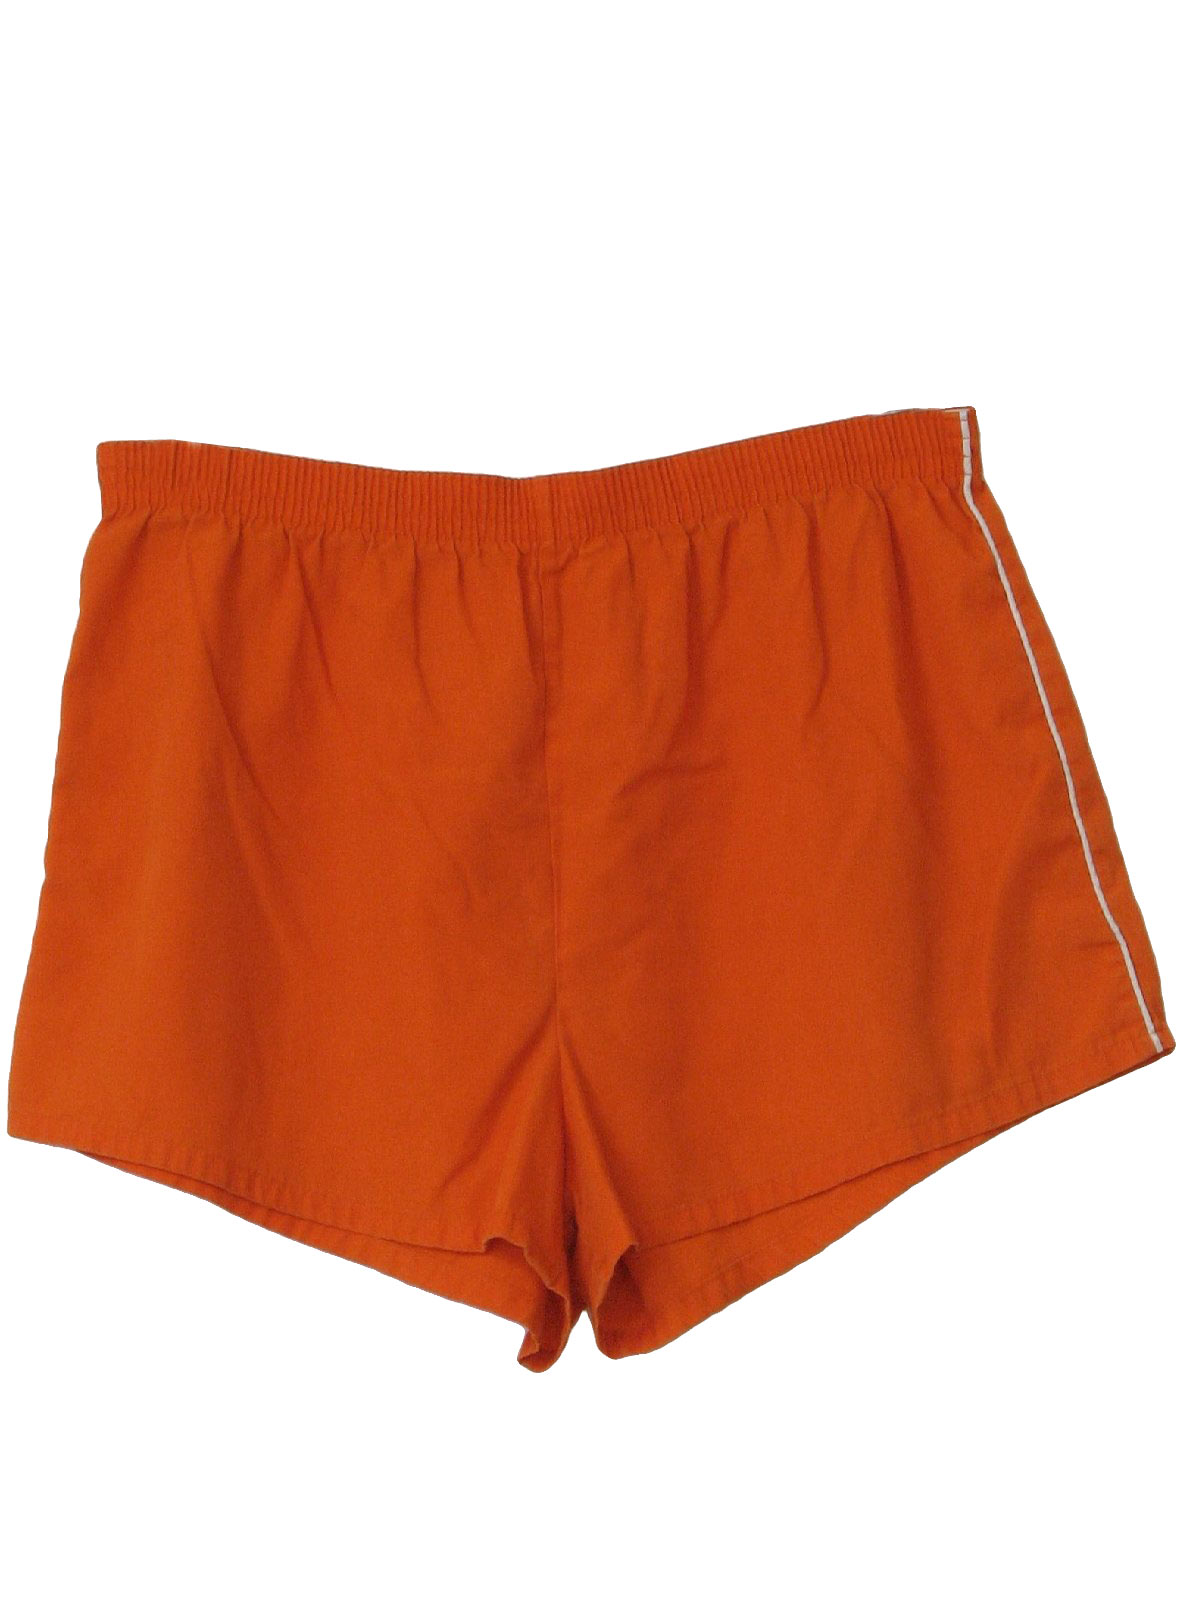 1980's Shorts (Care Label): 80s -Care Label- Mens orange polyester and ...